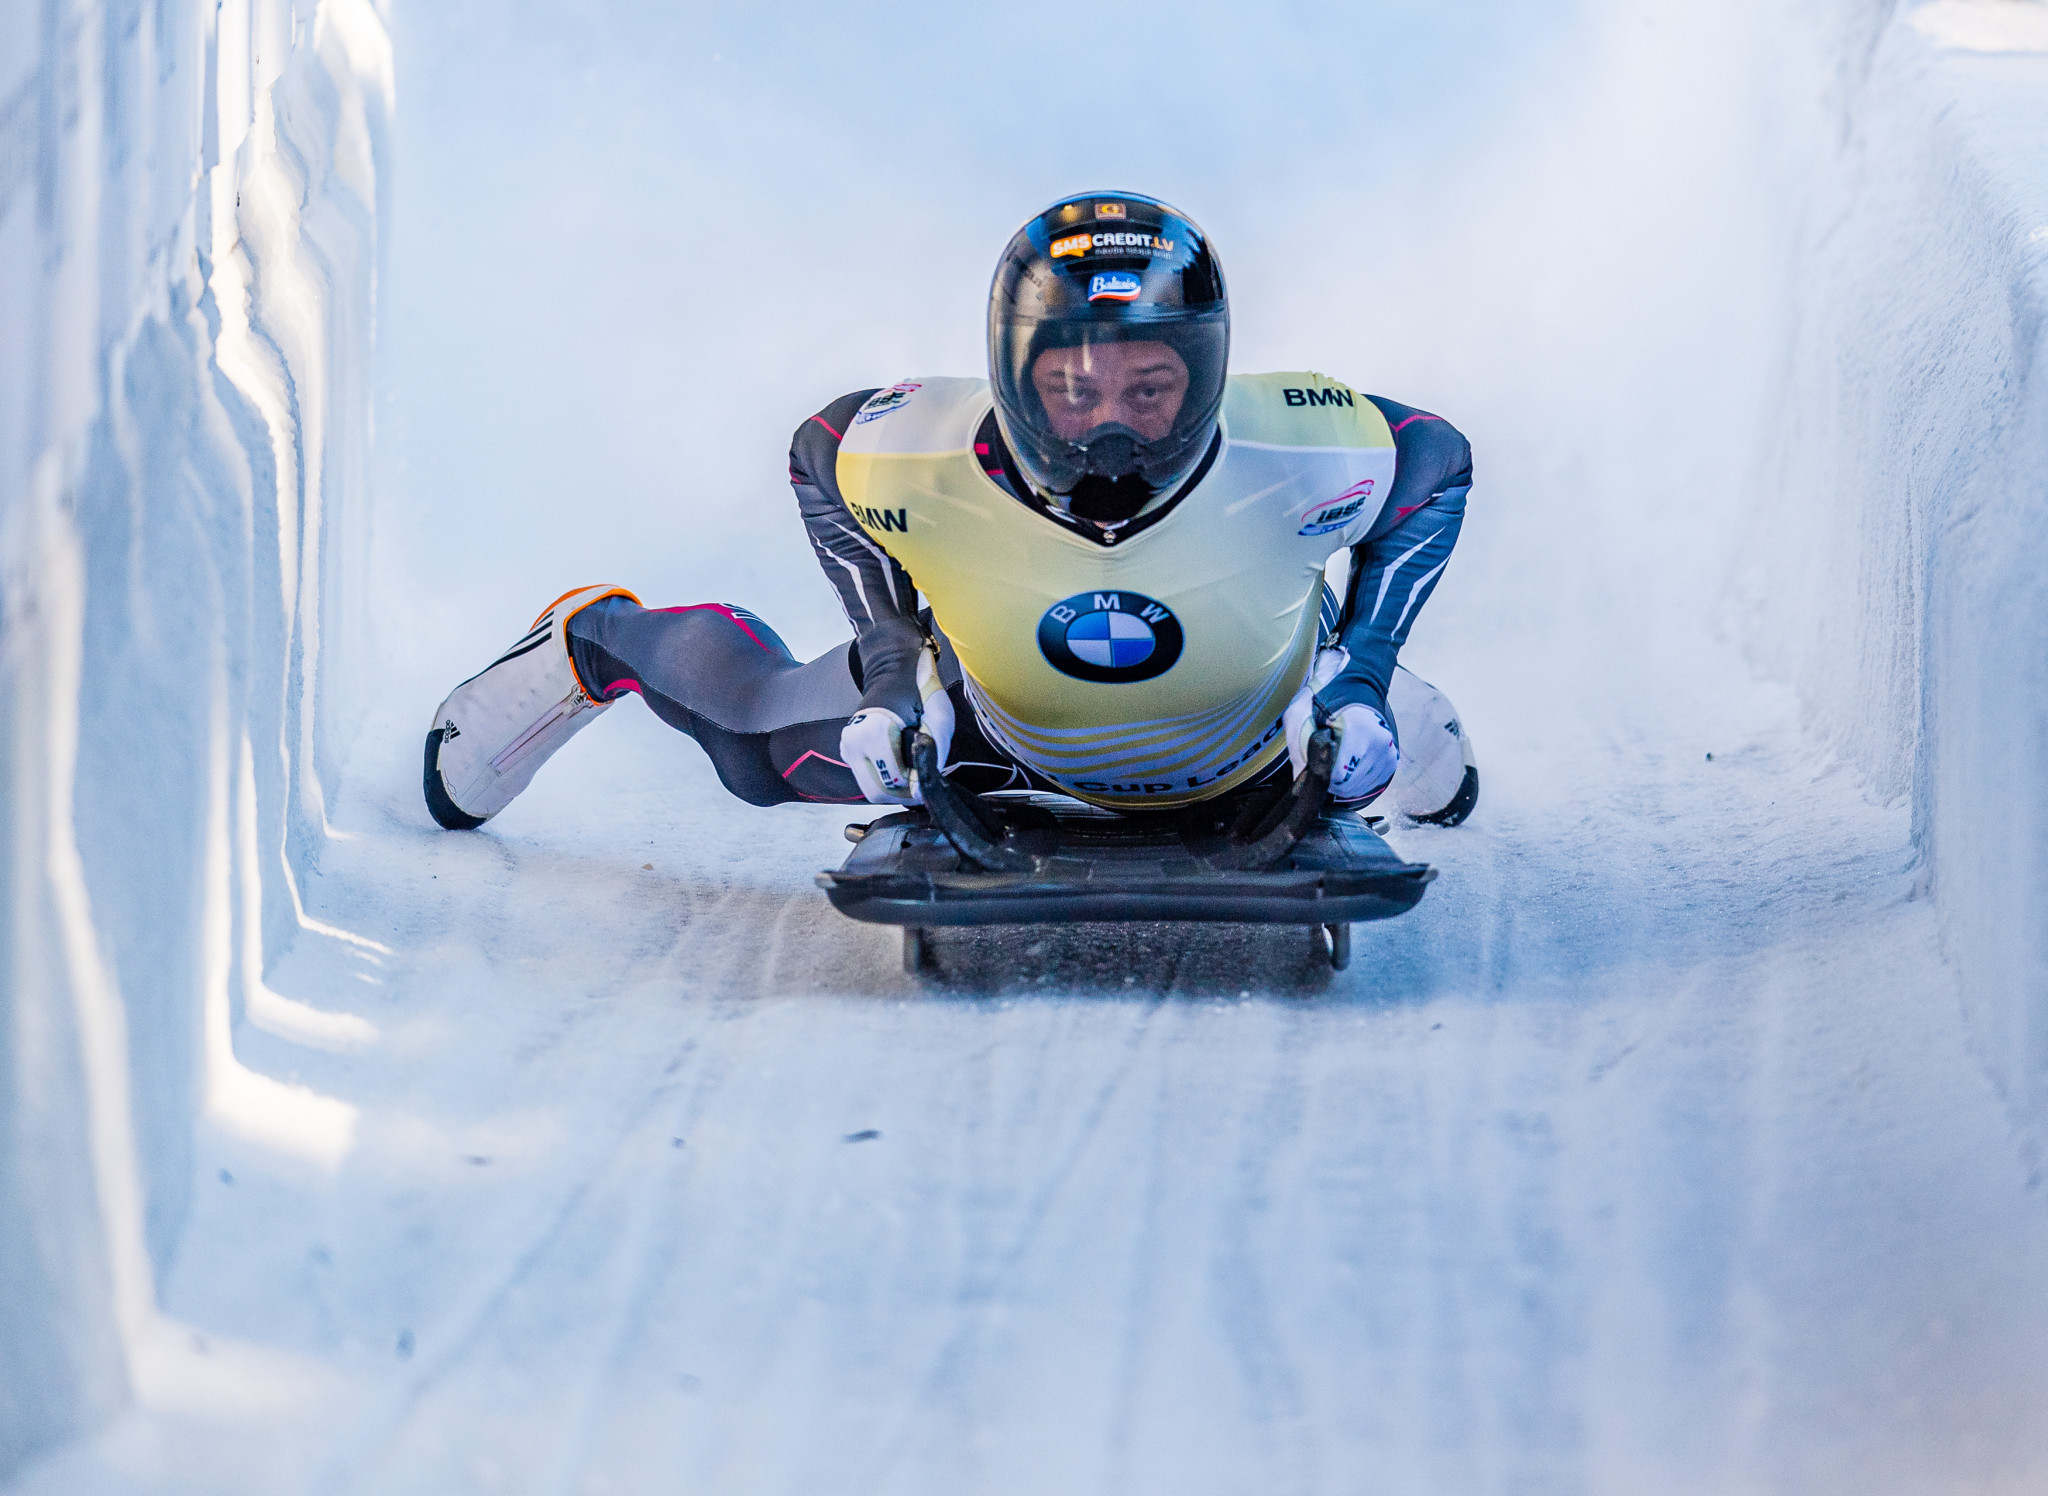 Latvia's Martins Dukurs will be the man to beat in the men's skeleton ©Getty Images